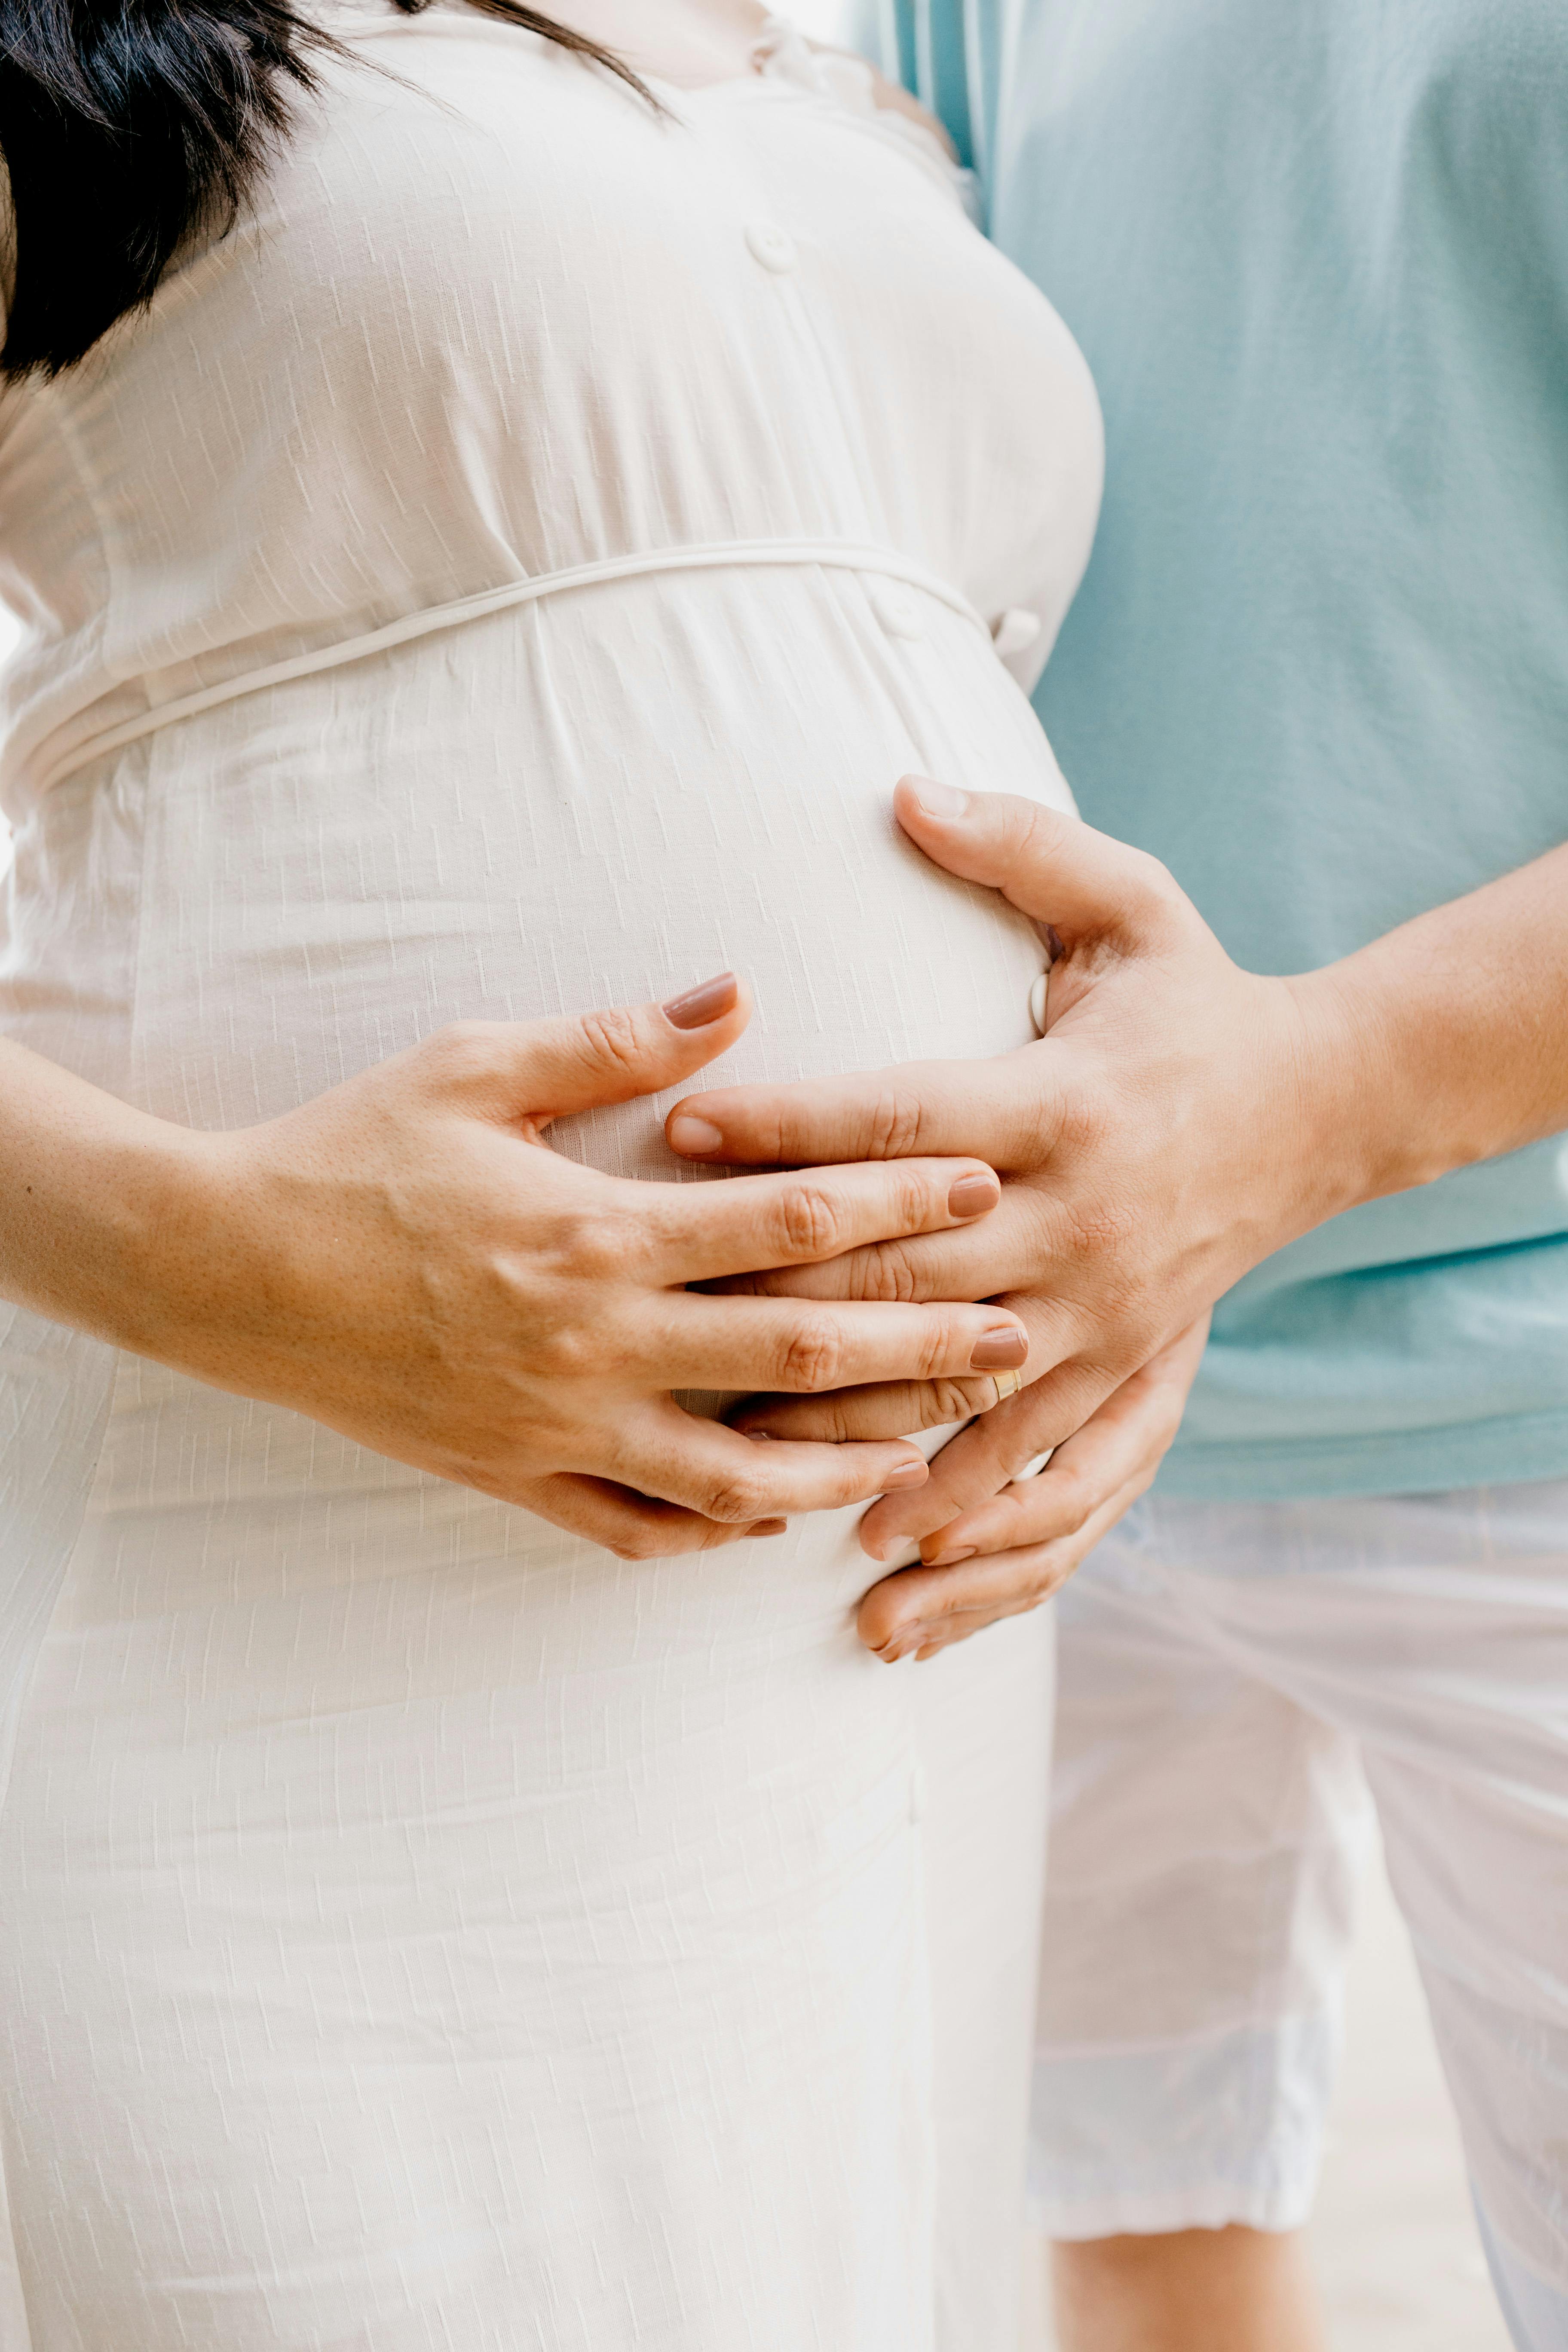 A man and woman holding the latter's baby bump | Source: Pexels